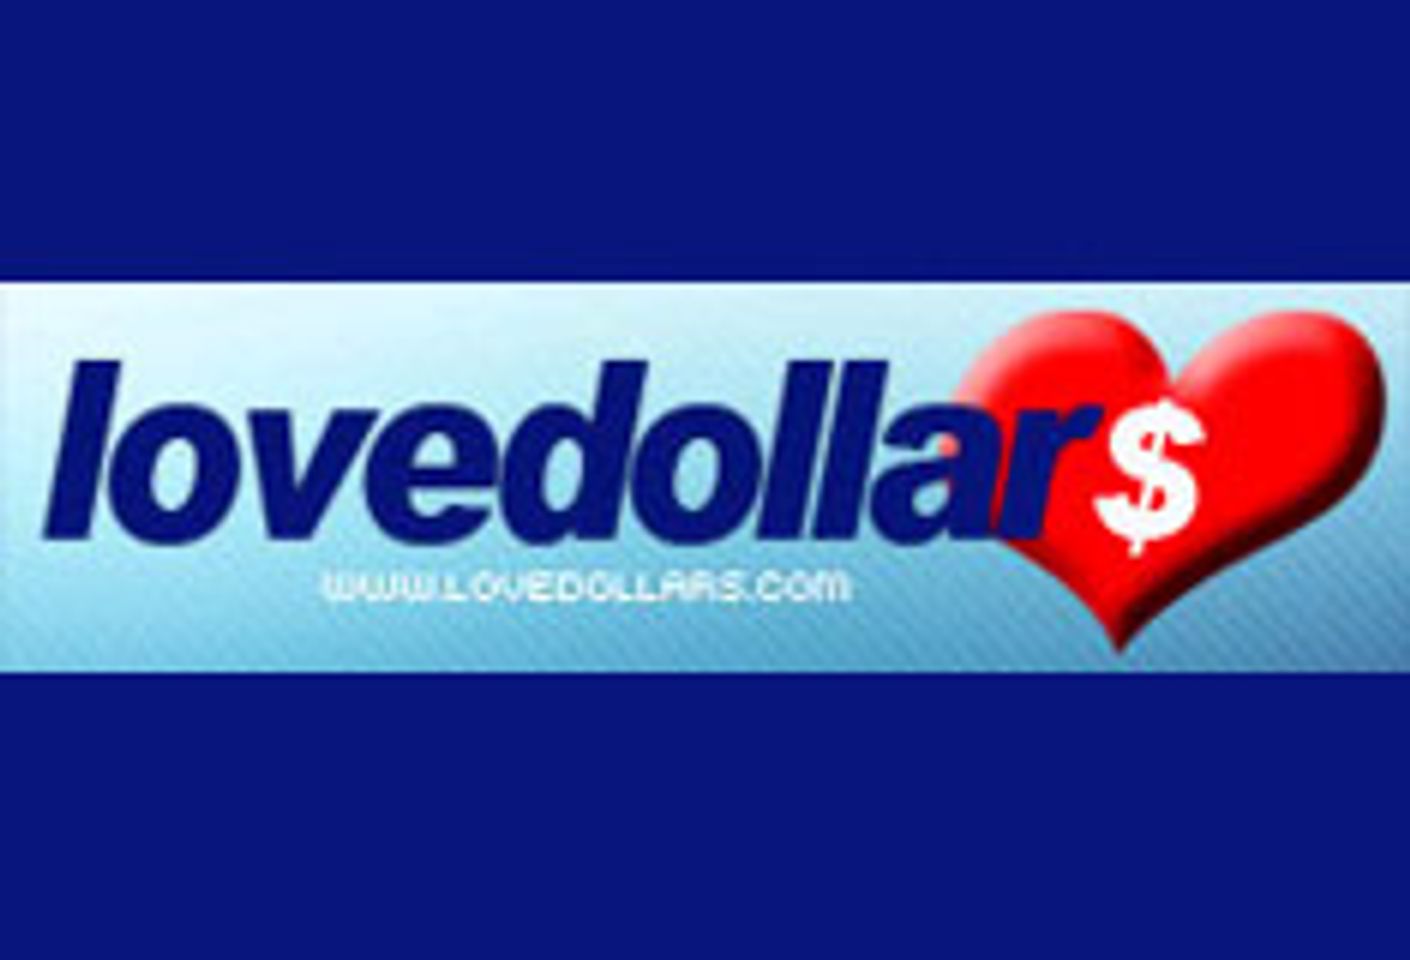 Love Dollars Version 3 Launched